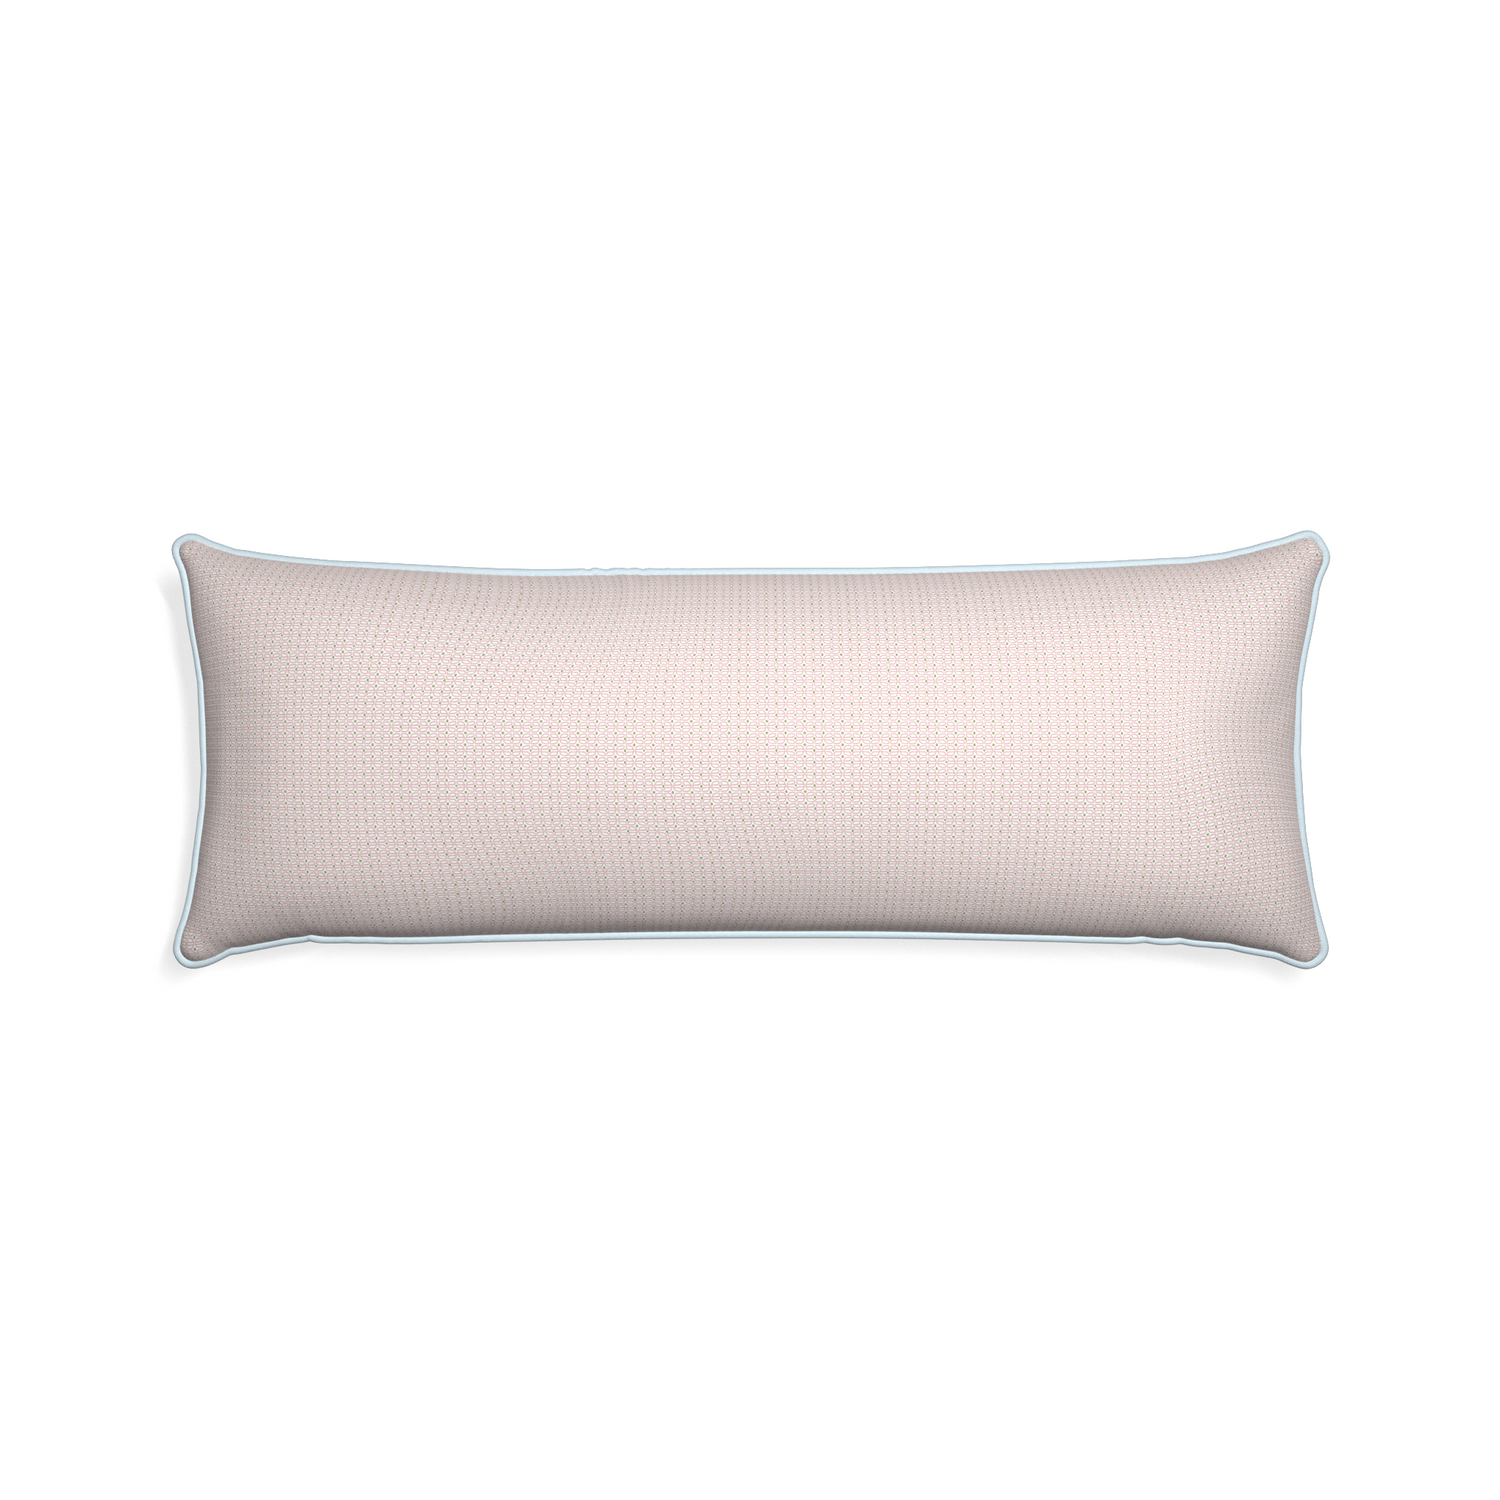 Xl-lumbar loomi pink custom pink geometricpillow with powder piping on white background